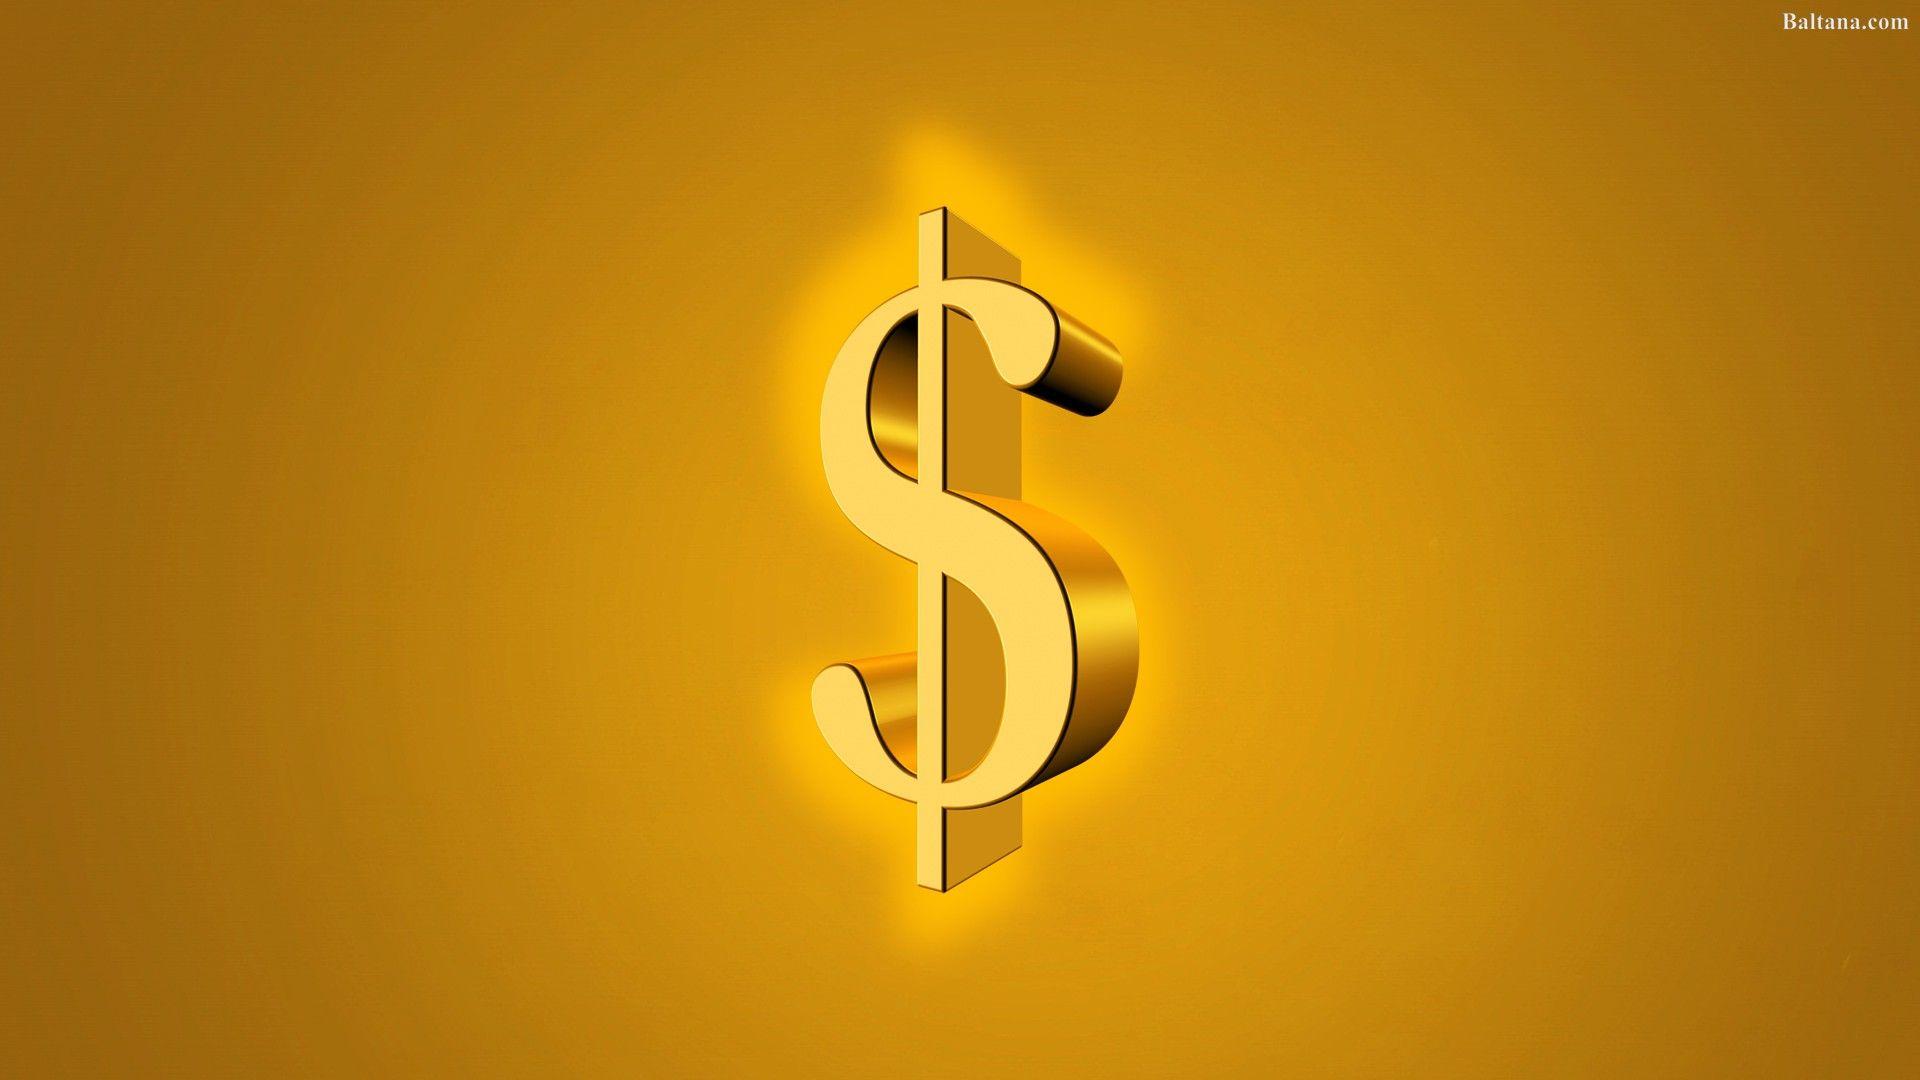 Wallpaper ID 748627  currency communication logo savings text  indoors money business retail dollars wealth sign closeup no  people economy blue finance dollar sign free download